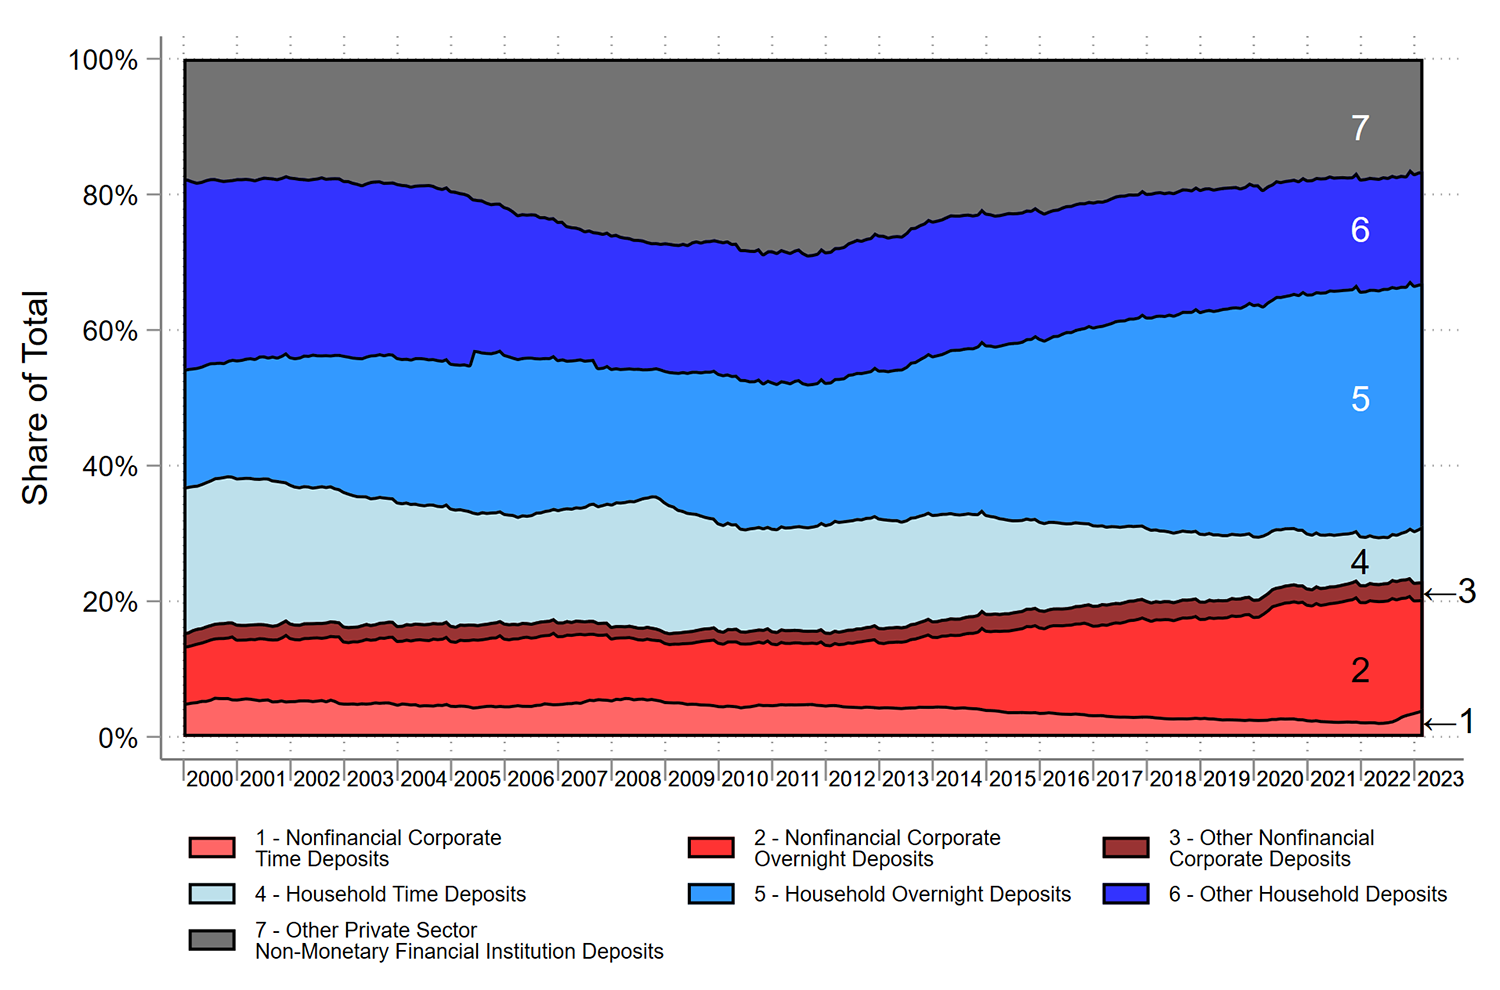 Figure 2. Deposit Breakdown of Private, Non-Monetary Financial Institution Deposits. See accessible link for data.